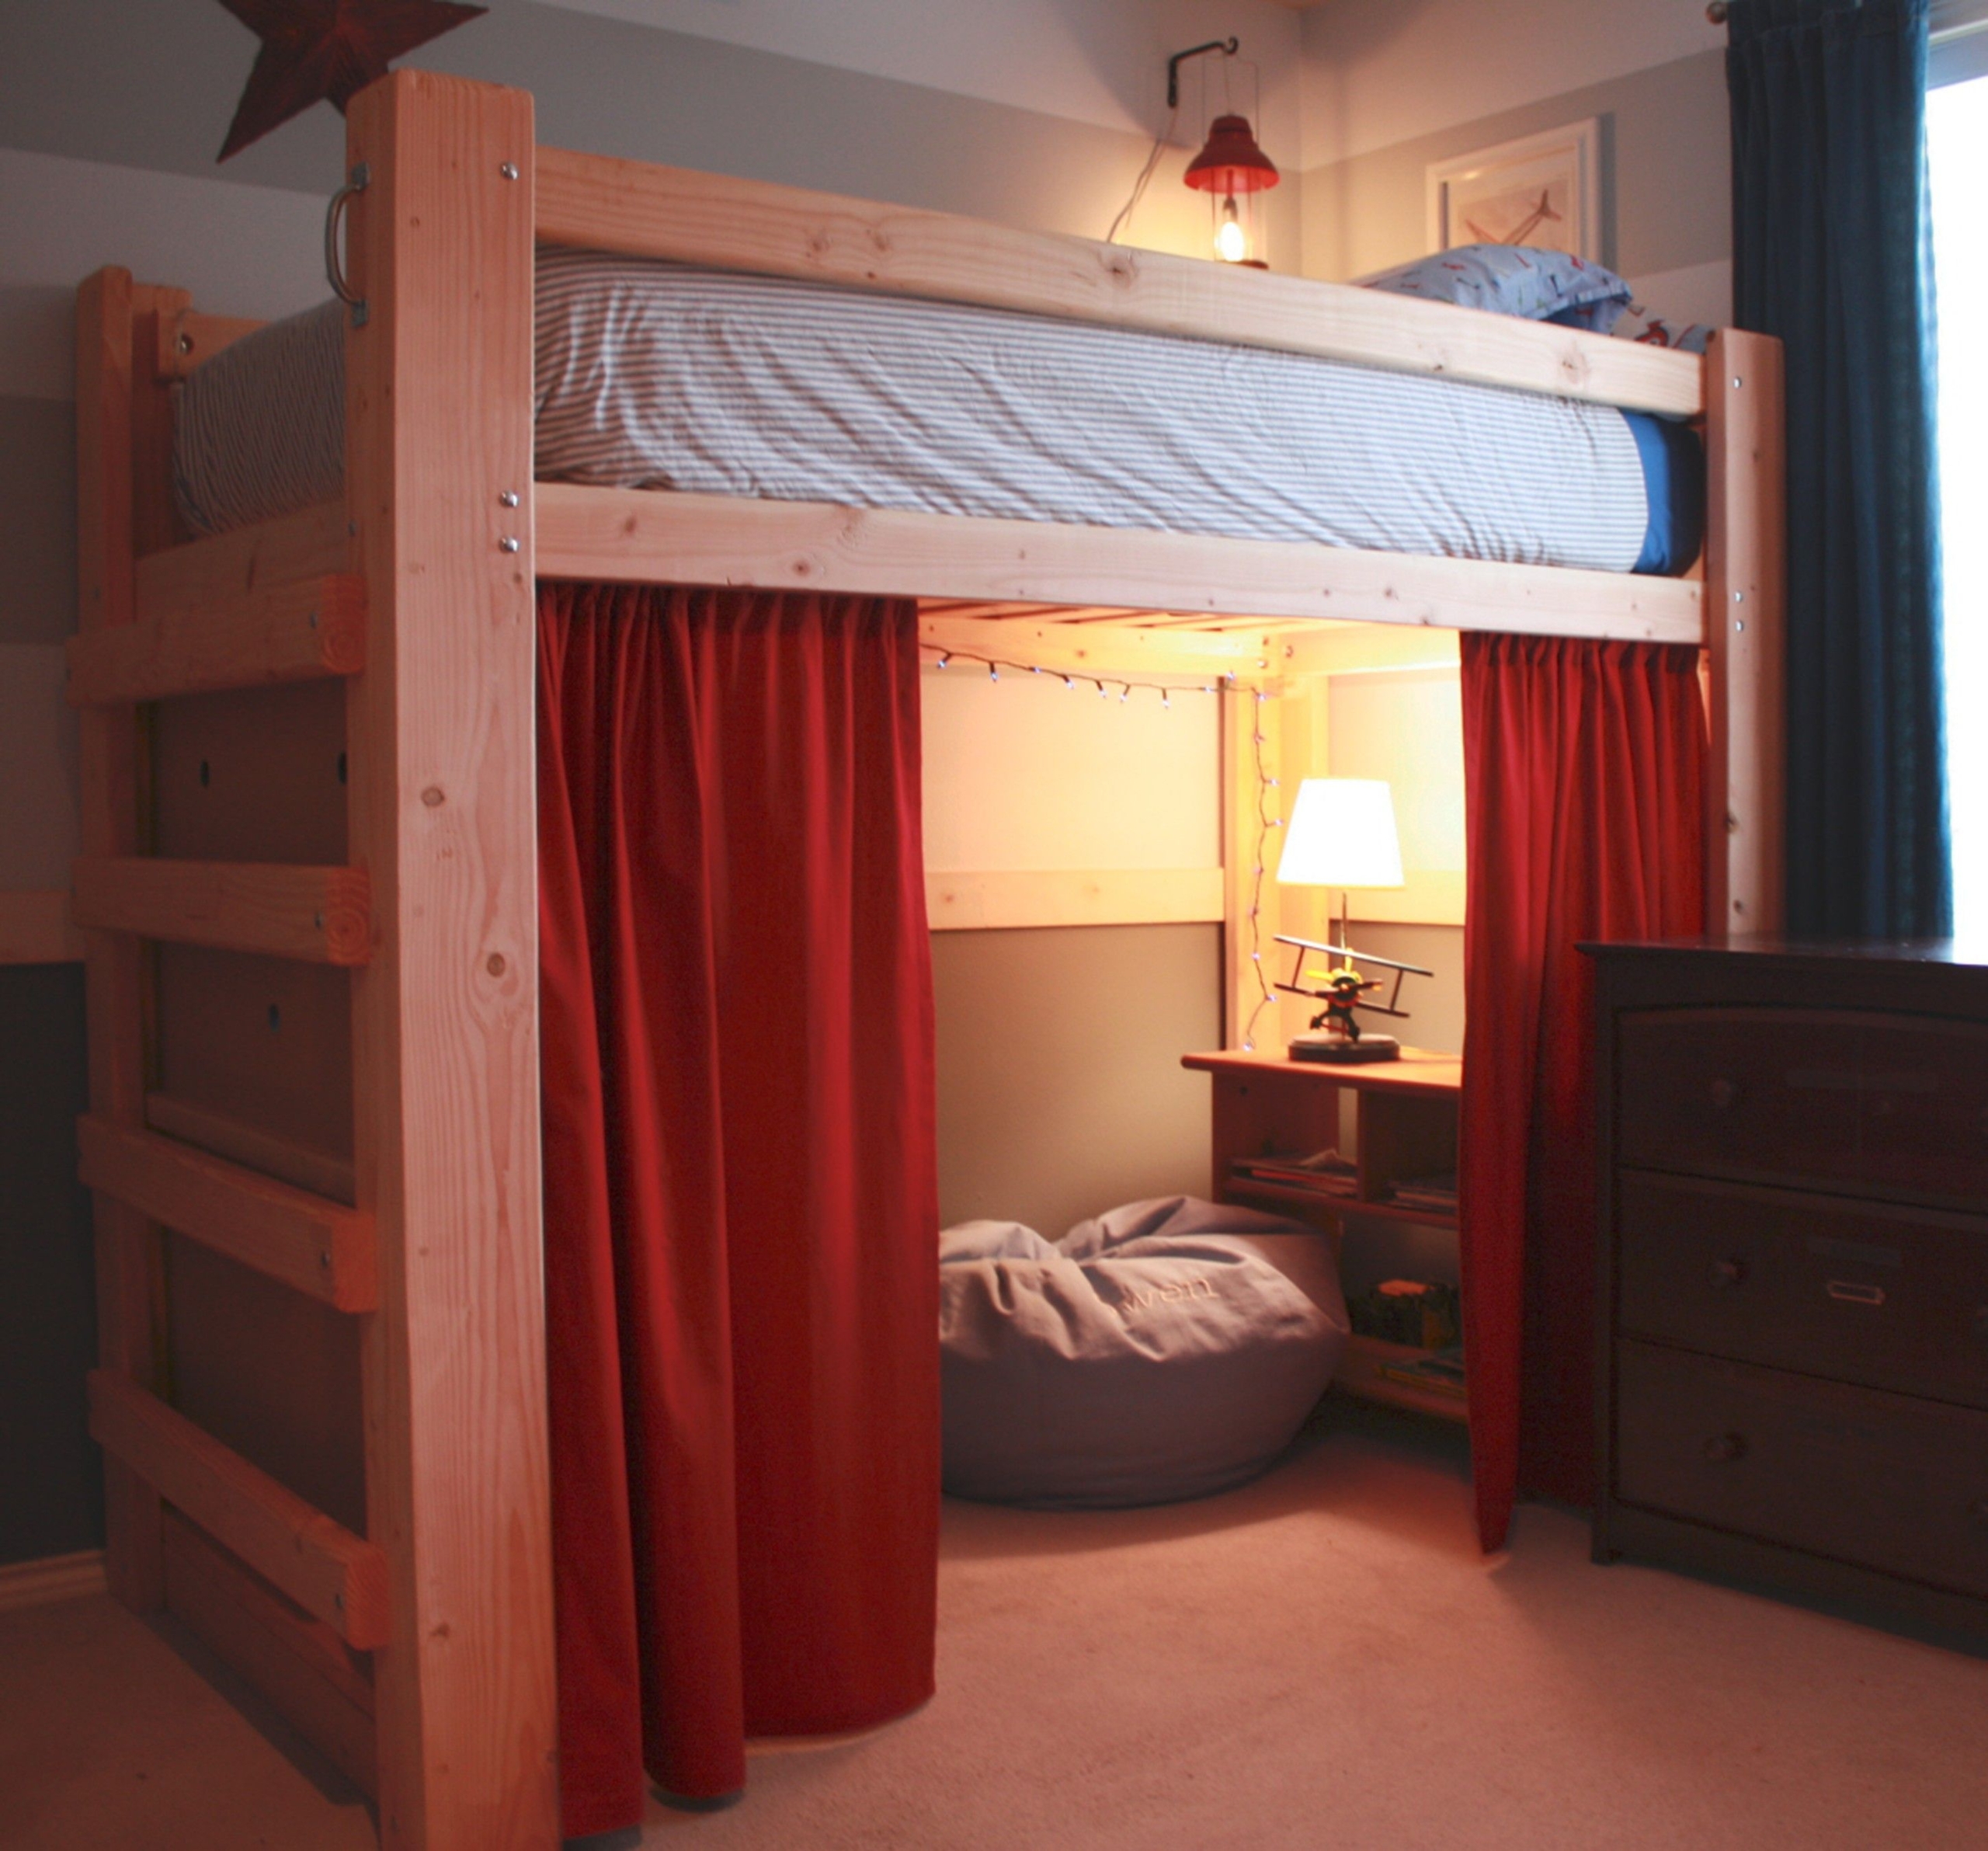 Study Bunk Bed Ideas On Foter